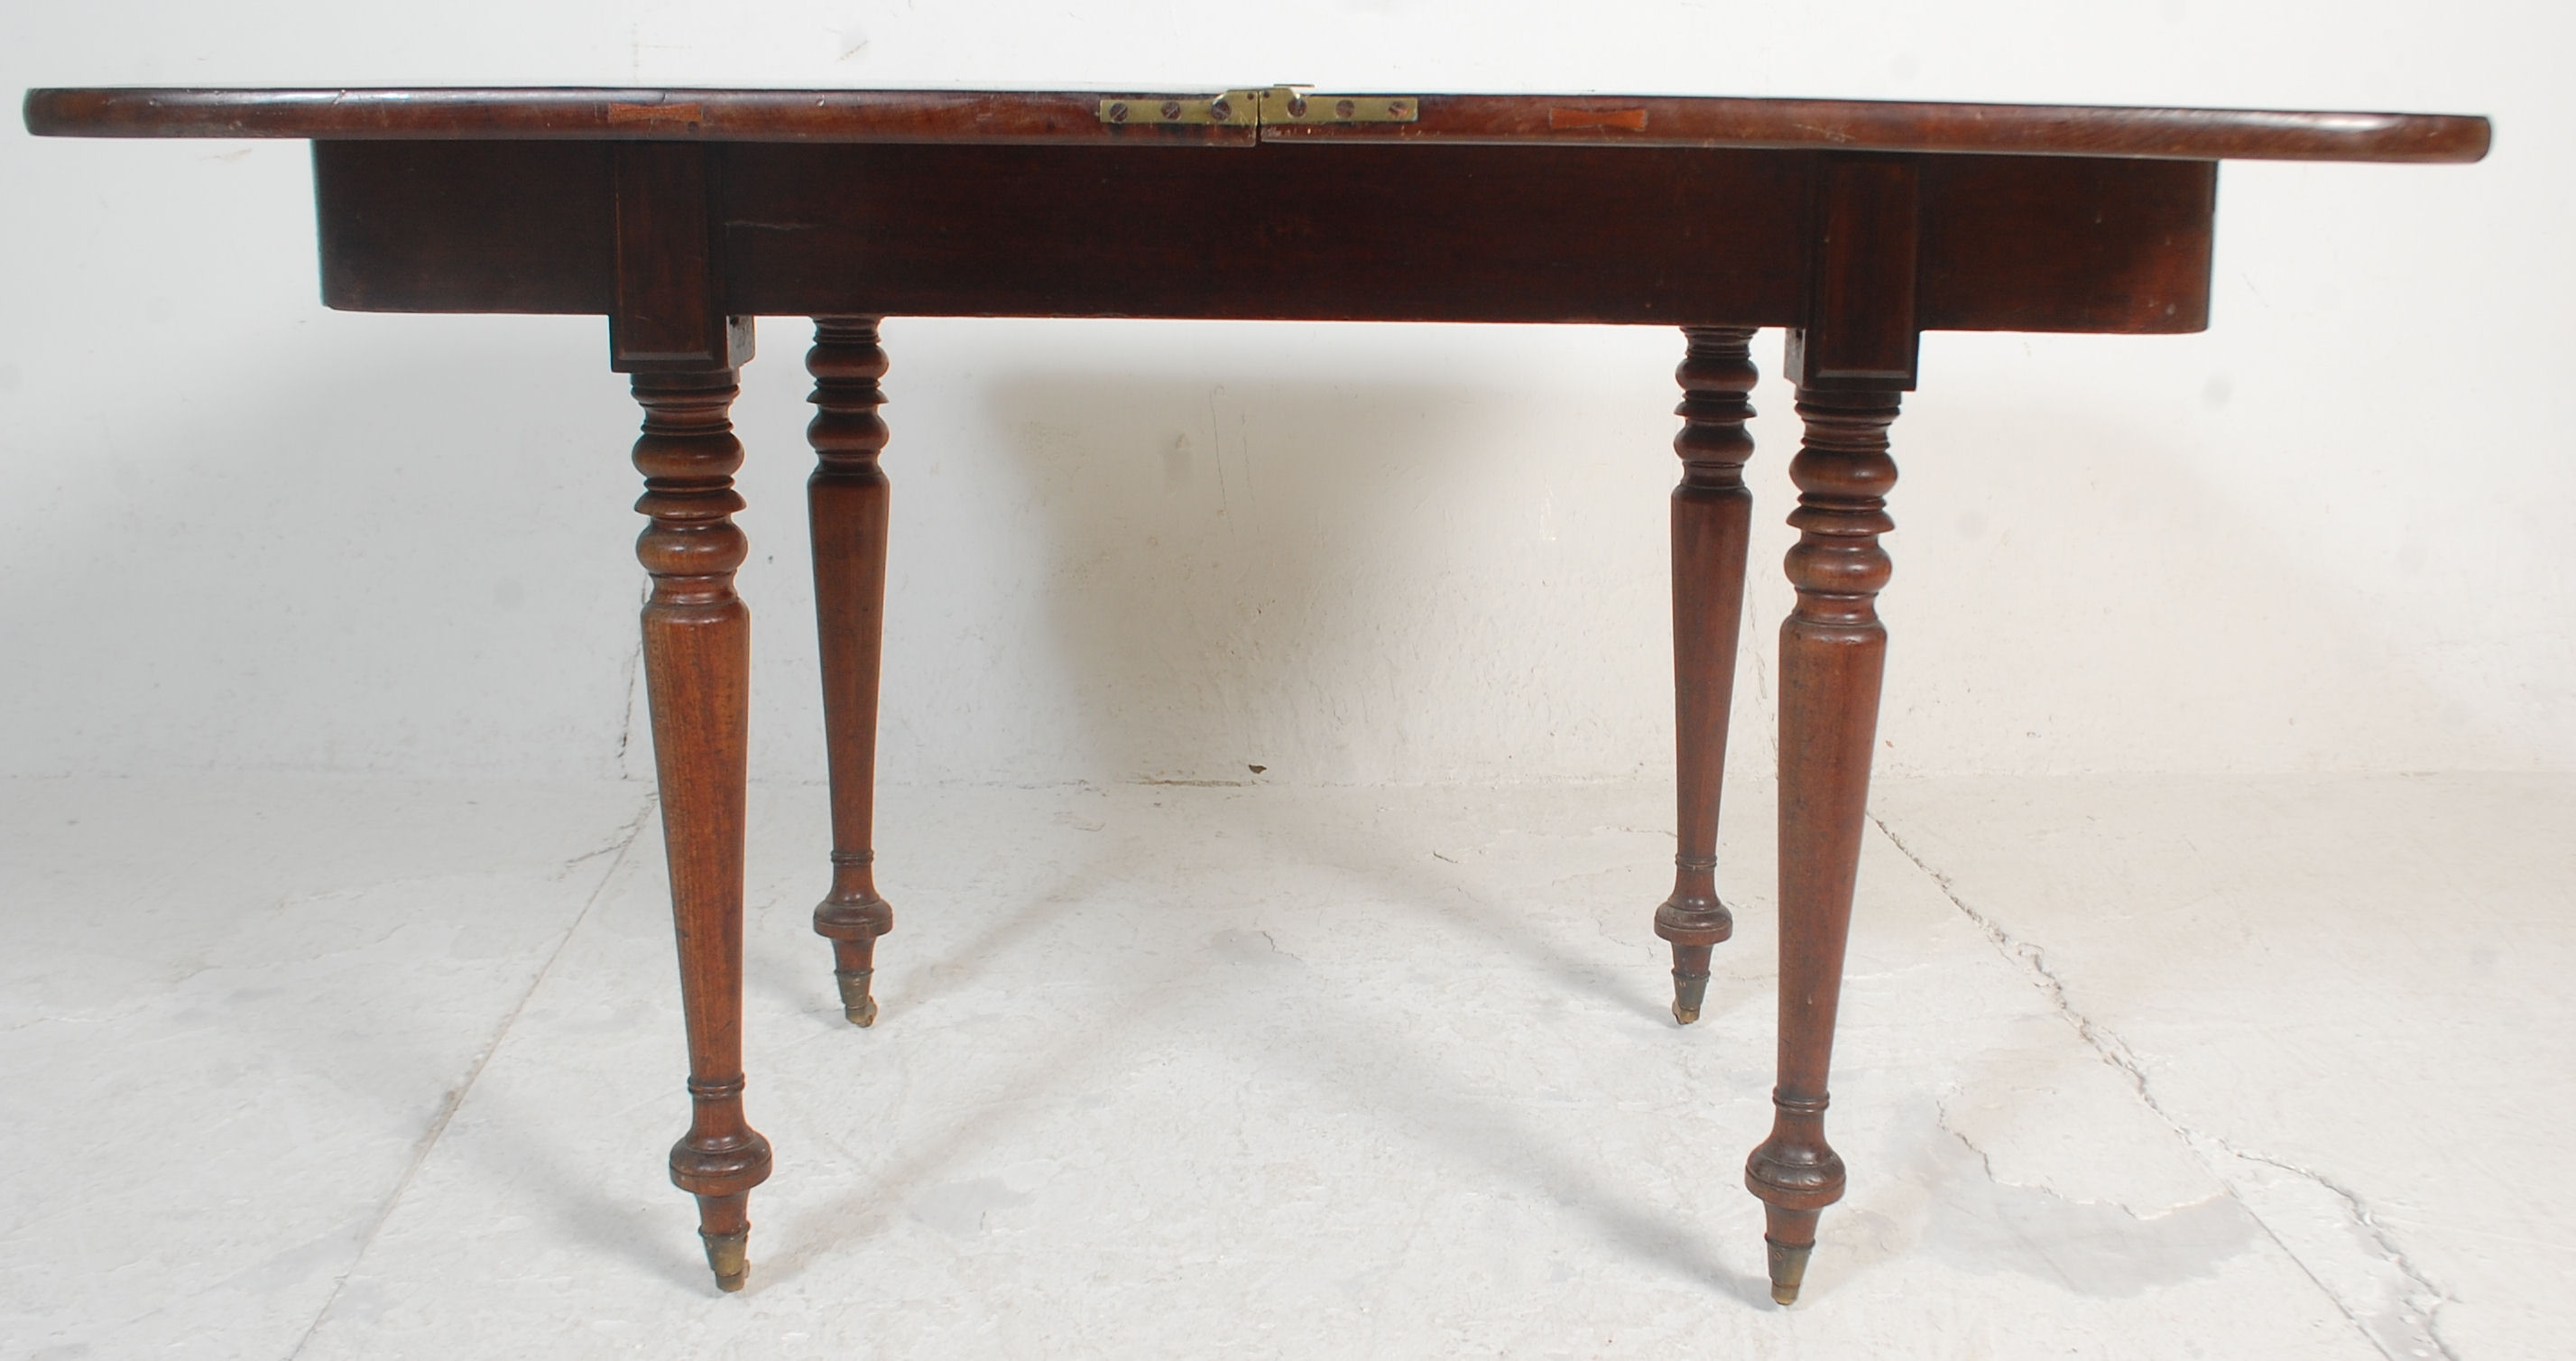 A 19th Century mahogany card / tea table having a folding and revolving top with brass fittings - Image 4 of 7